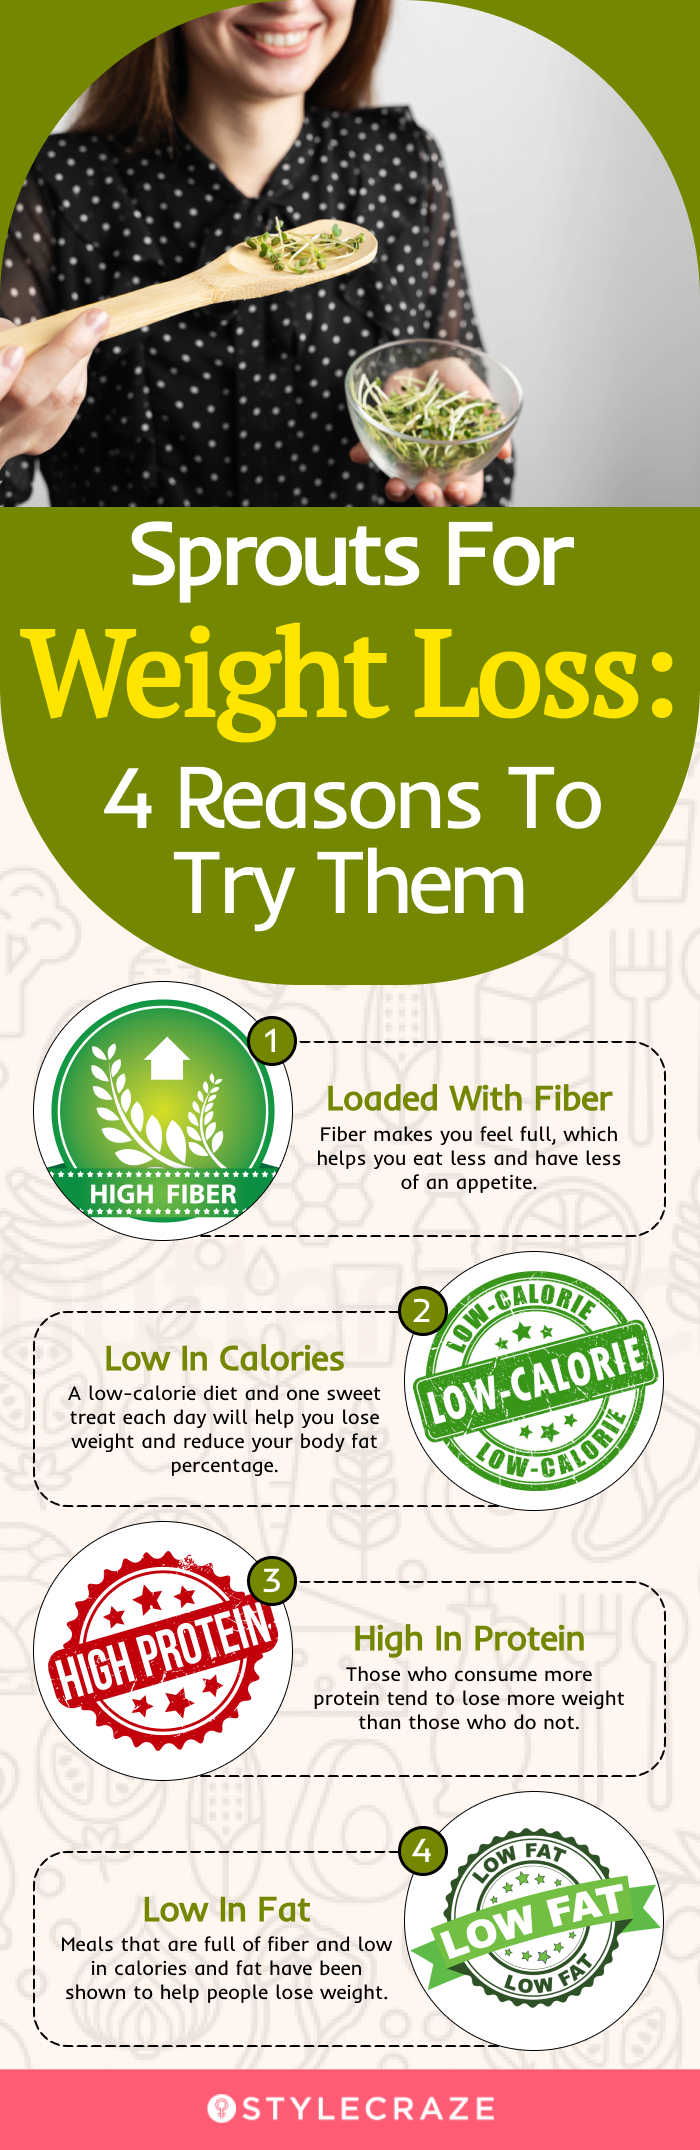 sprouts for weight loss 4 reasons to try them (infographic)